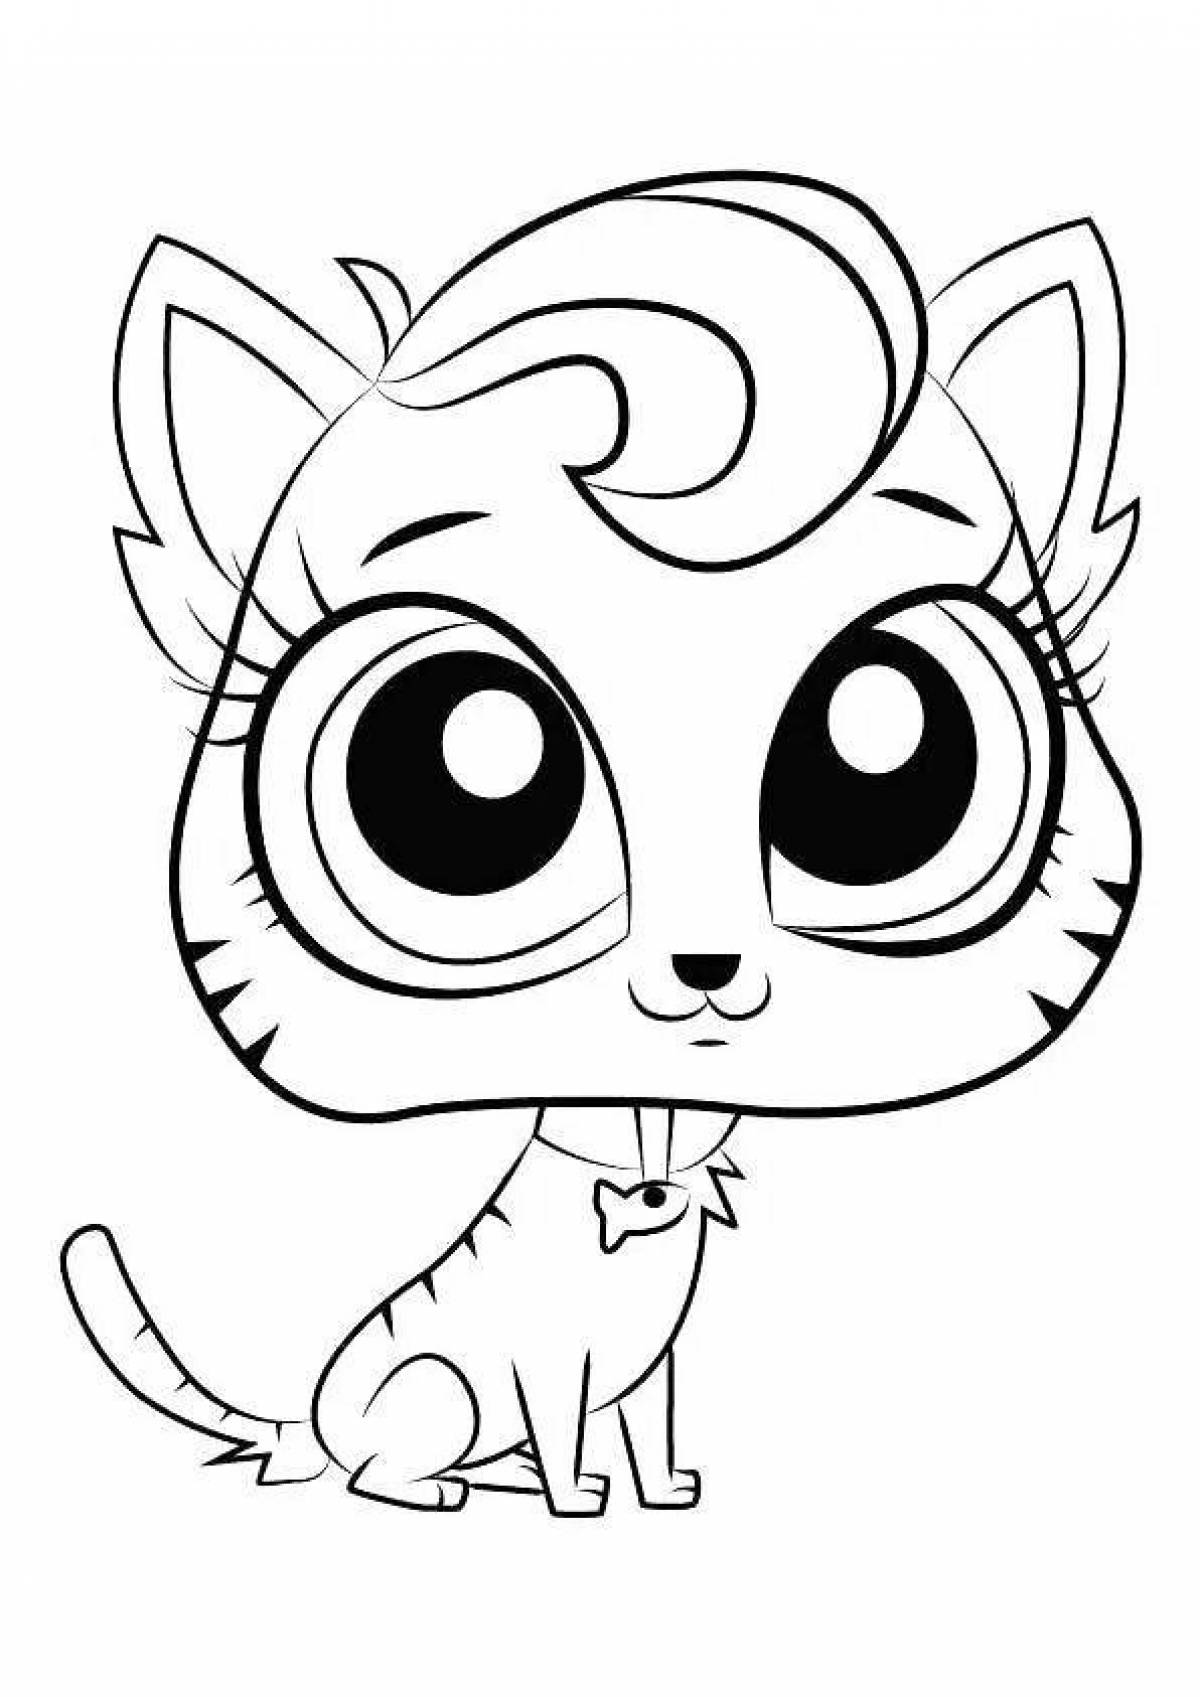 Fancy meow coloring